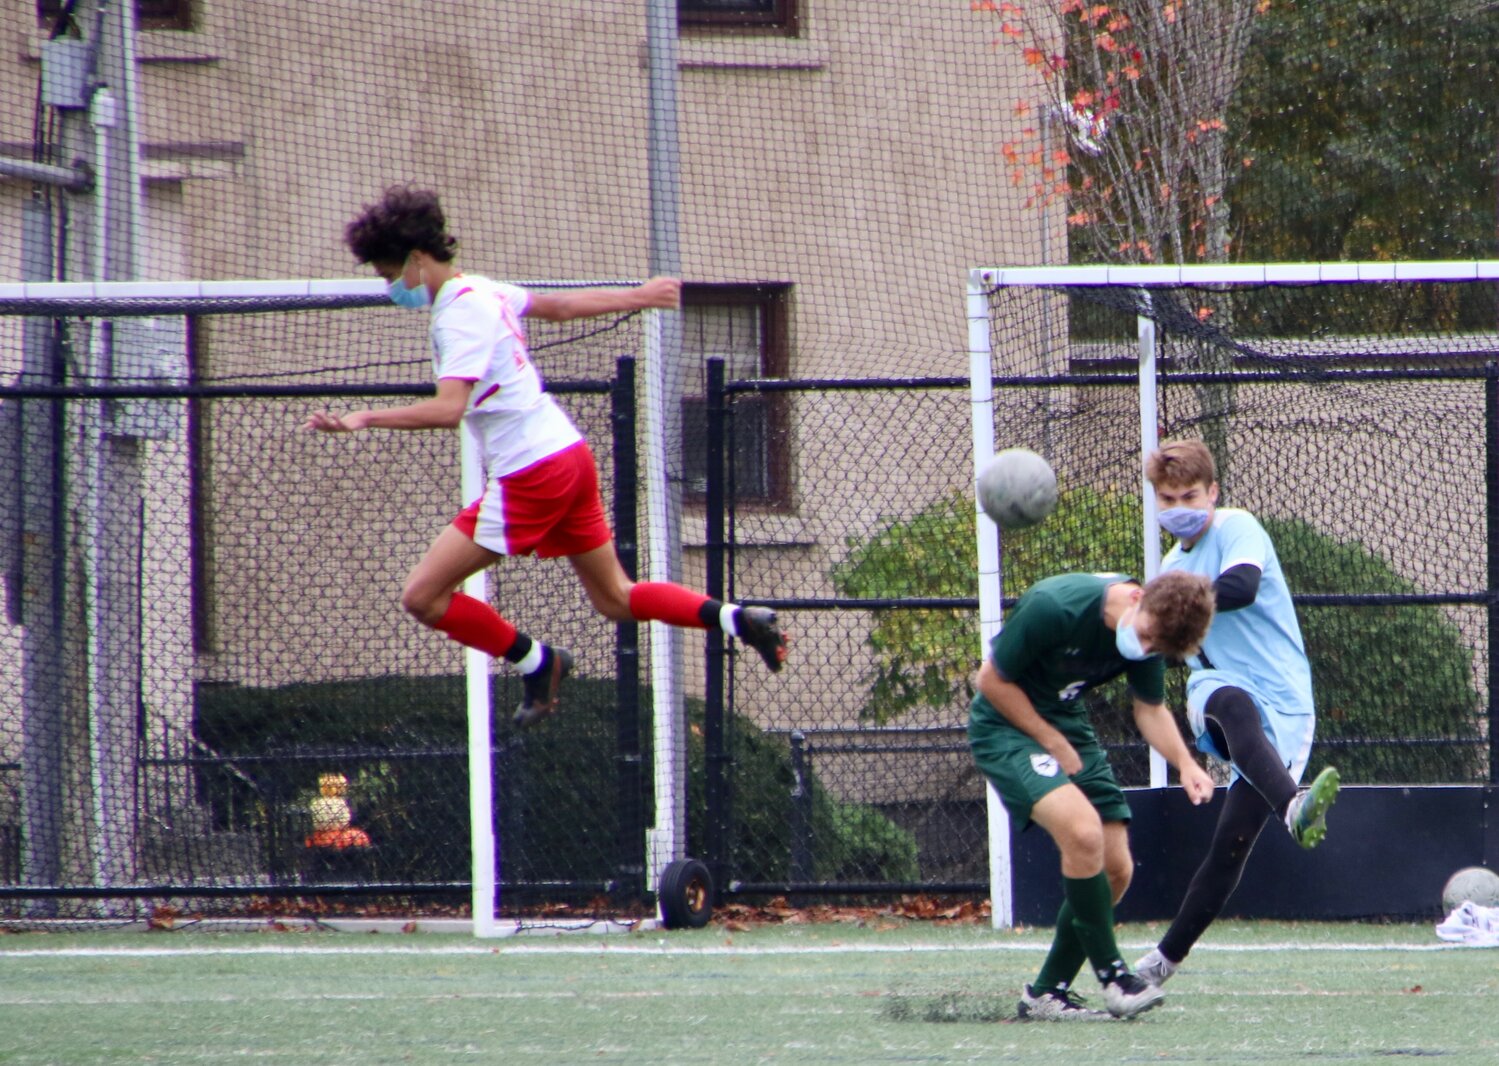 As keeper, Finn Carlson, kicks the ball down the field a Hornet player ducks as an Amesbury opponent flies through the air. The Hornets played the Indians to a 0-0 tie after 80 minutes of grueling play at Hyland Field on Saturday. Both teams were very active back and forth on the field demonstrating how fit the referees had to be to keep up the pace. More photos at https://www.facebook.com/TheManchesterCricket/. 